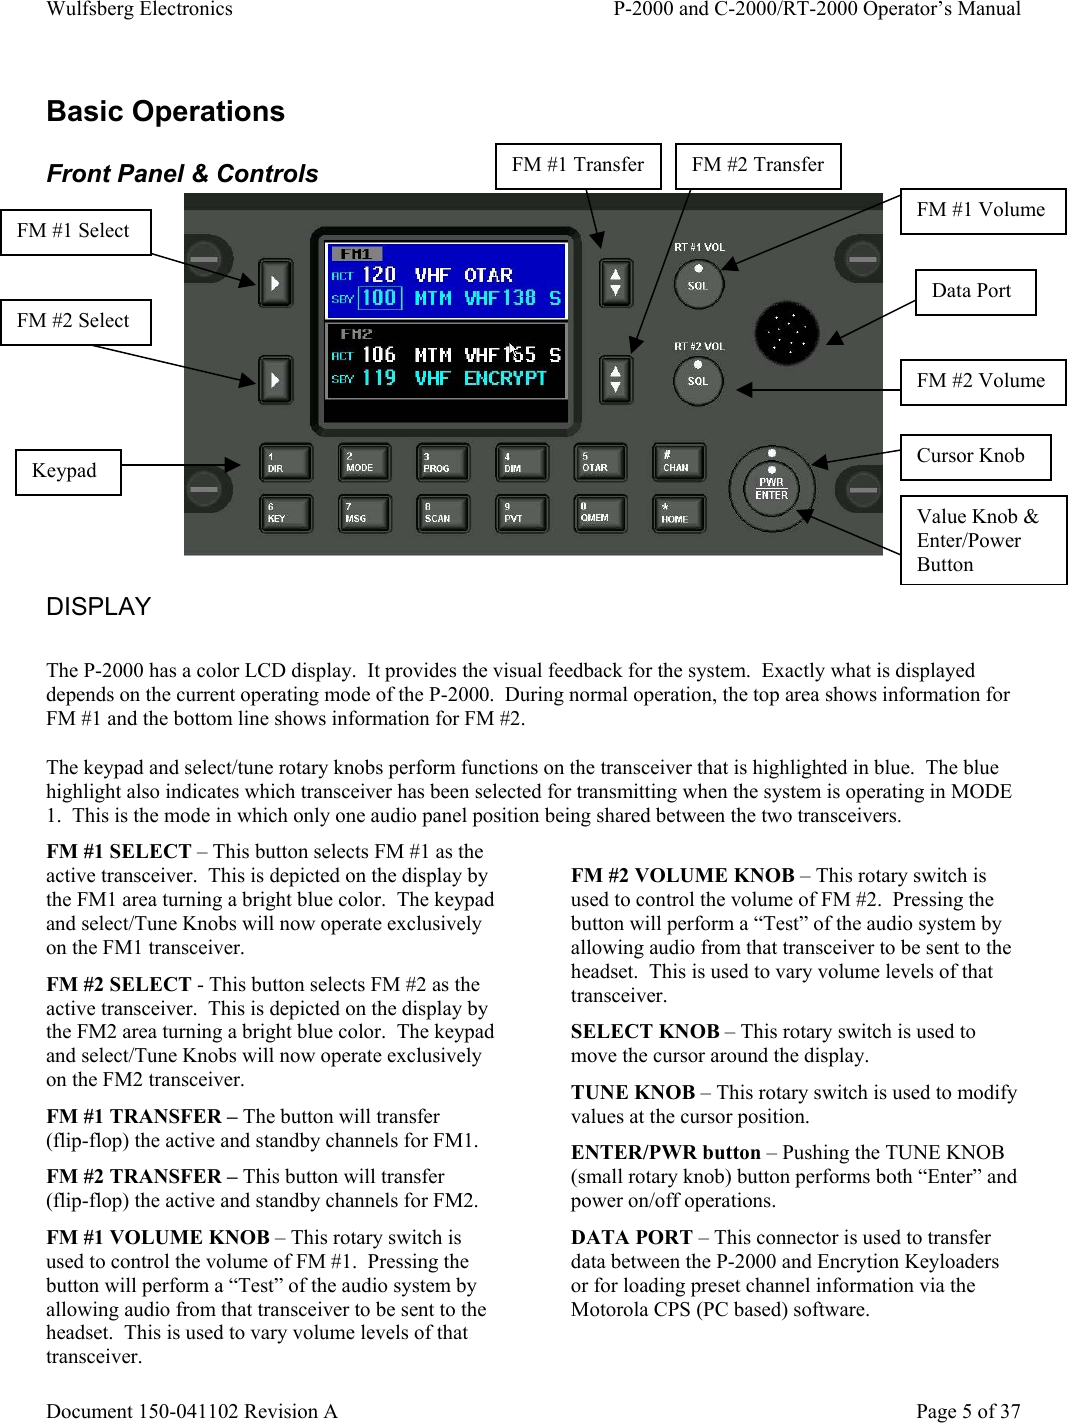 Wulfsberg Electronics P-2000 and C-2000/RT-2000 Operator’s ManualDocument 150-041102 Revision A Page 5 of 37Basic OperationsFront Panel &amp; ControlsDISPLAYThe P-2000 has a color LCD display.  It provides the visual feedback for the system.  Exactly what is displayeddepends on the current operating mode of the P-2000.  During normal operation, the top area shows information forFM #1 and the bottom line shows information for FM #2.The keypad and select/tune rotary knobs perform functions on the transceiver that is highlighted in blue.  The bluehighlight also indicates which transceiver has been selected for transmitting when the system is operating in MODE1.  This is the mode in which only one audio panel position being shared between the two transceivers.FM #1 SELECT – This button selects FM #1 as theactive transceiver.  This is depicted on the display bythe FM1 area turning a bright blue color.  The keypadand select/Tune Knobs will now operate exclusivelyon the FM1 transceiver.FM #2 SELECT - This button selects FM #2 as theactive transceiver.  This is depicted on the display bythe FM2 area turning a bright blue color.  The keypadand select/Tune Knobs will now operate exclusivelyon the FM2 transceiver.FM #1 TRANSFER – The button will transfer(flip-flop) the active and standby channels for FM1.FM #2 TRANSFER – This button will transfer(flip-flop) the active and standby channels for FM2.FM #1 VOLUME KNOB – This rotary switch isused to control the volume of FM #1.  Pressing thebutton will perform a “Test” of the audio system byallowing audio from that transceiver to be sent to theheadset.  This is used to vary volume levels of thattransceiver.FM #2 VOLUME KNOB – This rotary switch isused to control the volume of FM #2.  Pressing thebutton will perform a “Test” of the audio system byallowing audio from that transceiver to be sent to theheadset.  This is used to vary volume levels of thattransceiver.SELECT KNOB – This rotary switch is used tomove the cursor around the display.TUNE KNOB – This rotary switch is used to modifyvalues at the cursor position.ENTER/PWR button – Pushing the TUNE KNOB(small rotary knob) button performs both “Enter” andpower on/off operations.DATA PORT – This connector is used to transferdata between the P-2000 and Encrytion Keyloadersor for loading preset channel information via theMotorola CPS (PC based) software.FM #1 SelectFM #2 SelectFM #1 VolumeFM #2 VolumeData PortCursor KnobKeypadFM #1 Transfer FM #2 TransferValue Knob &amp;Enter/PowerButton